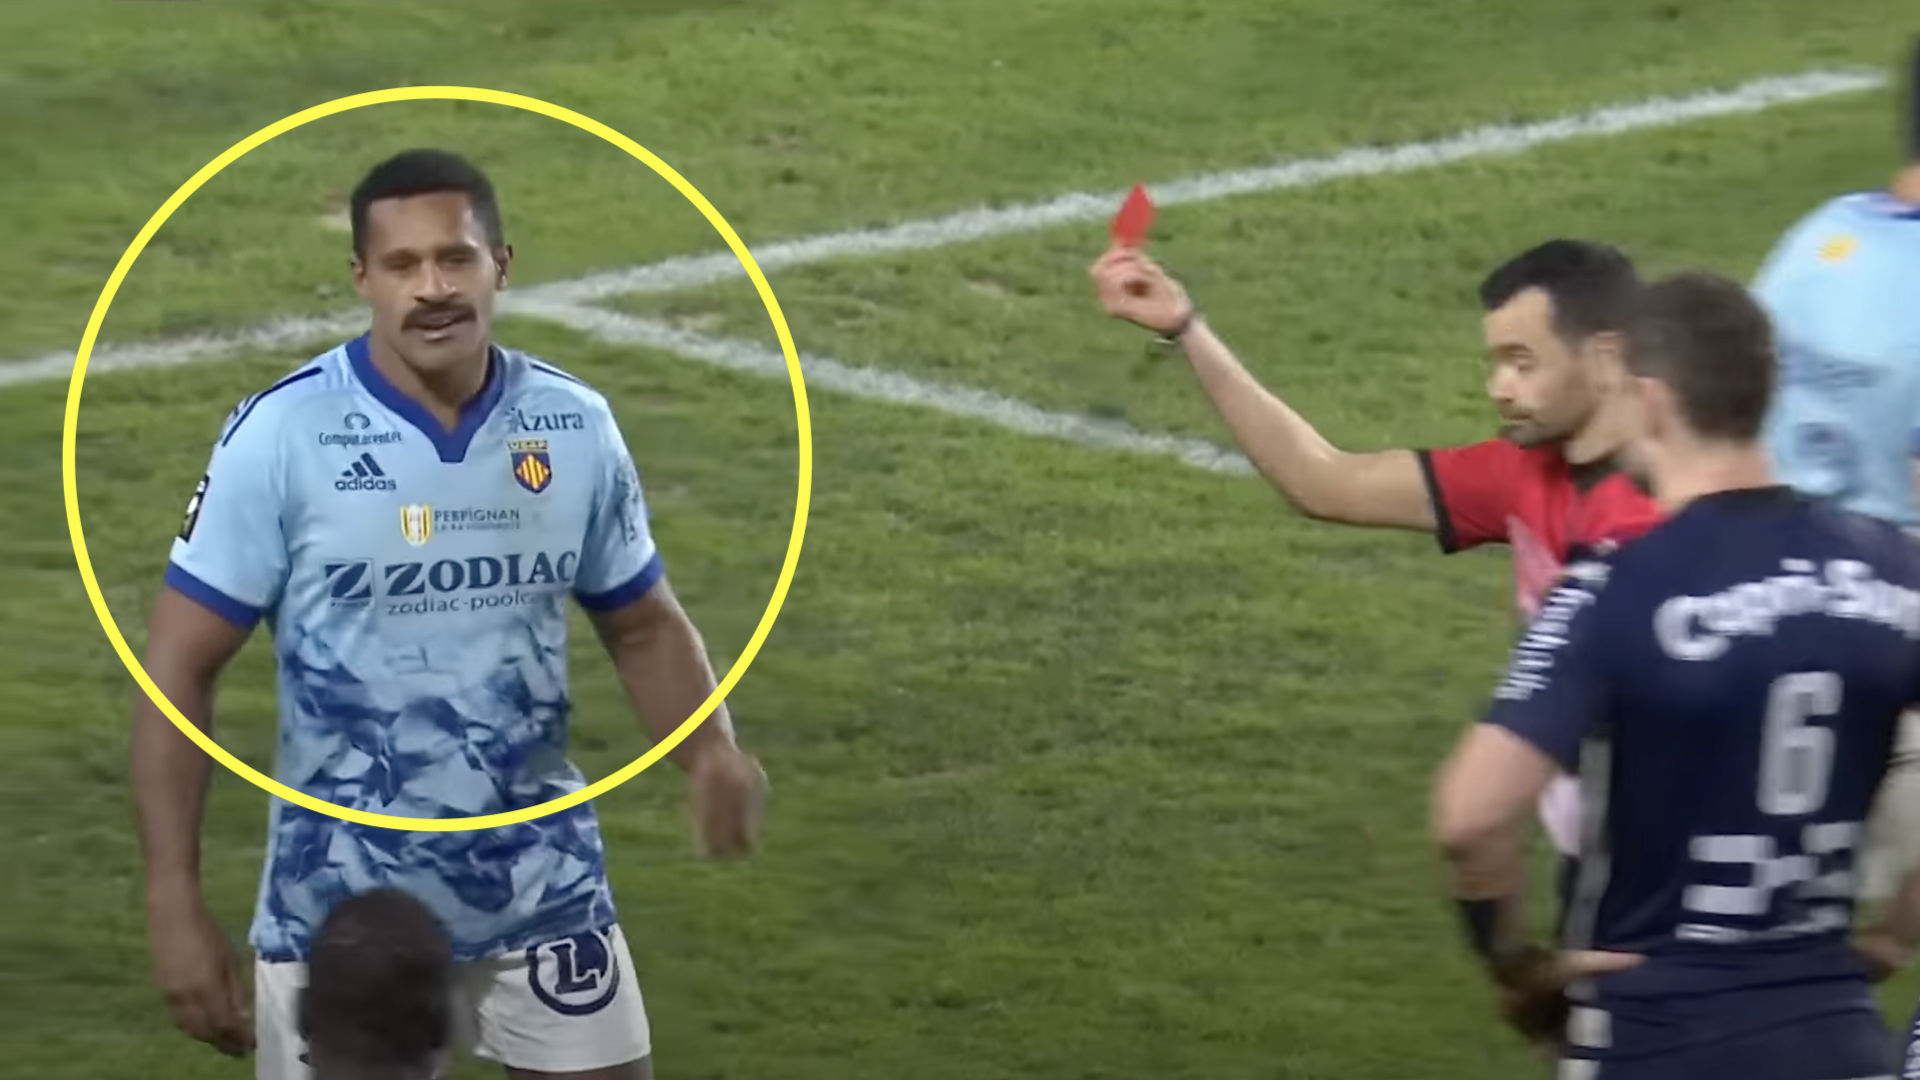 Former All Black has surely received the stupidest red card in history